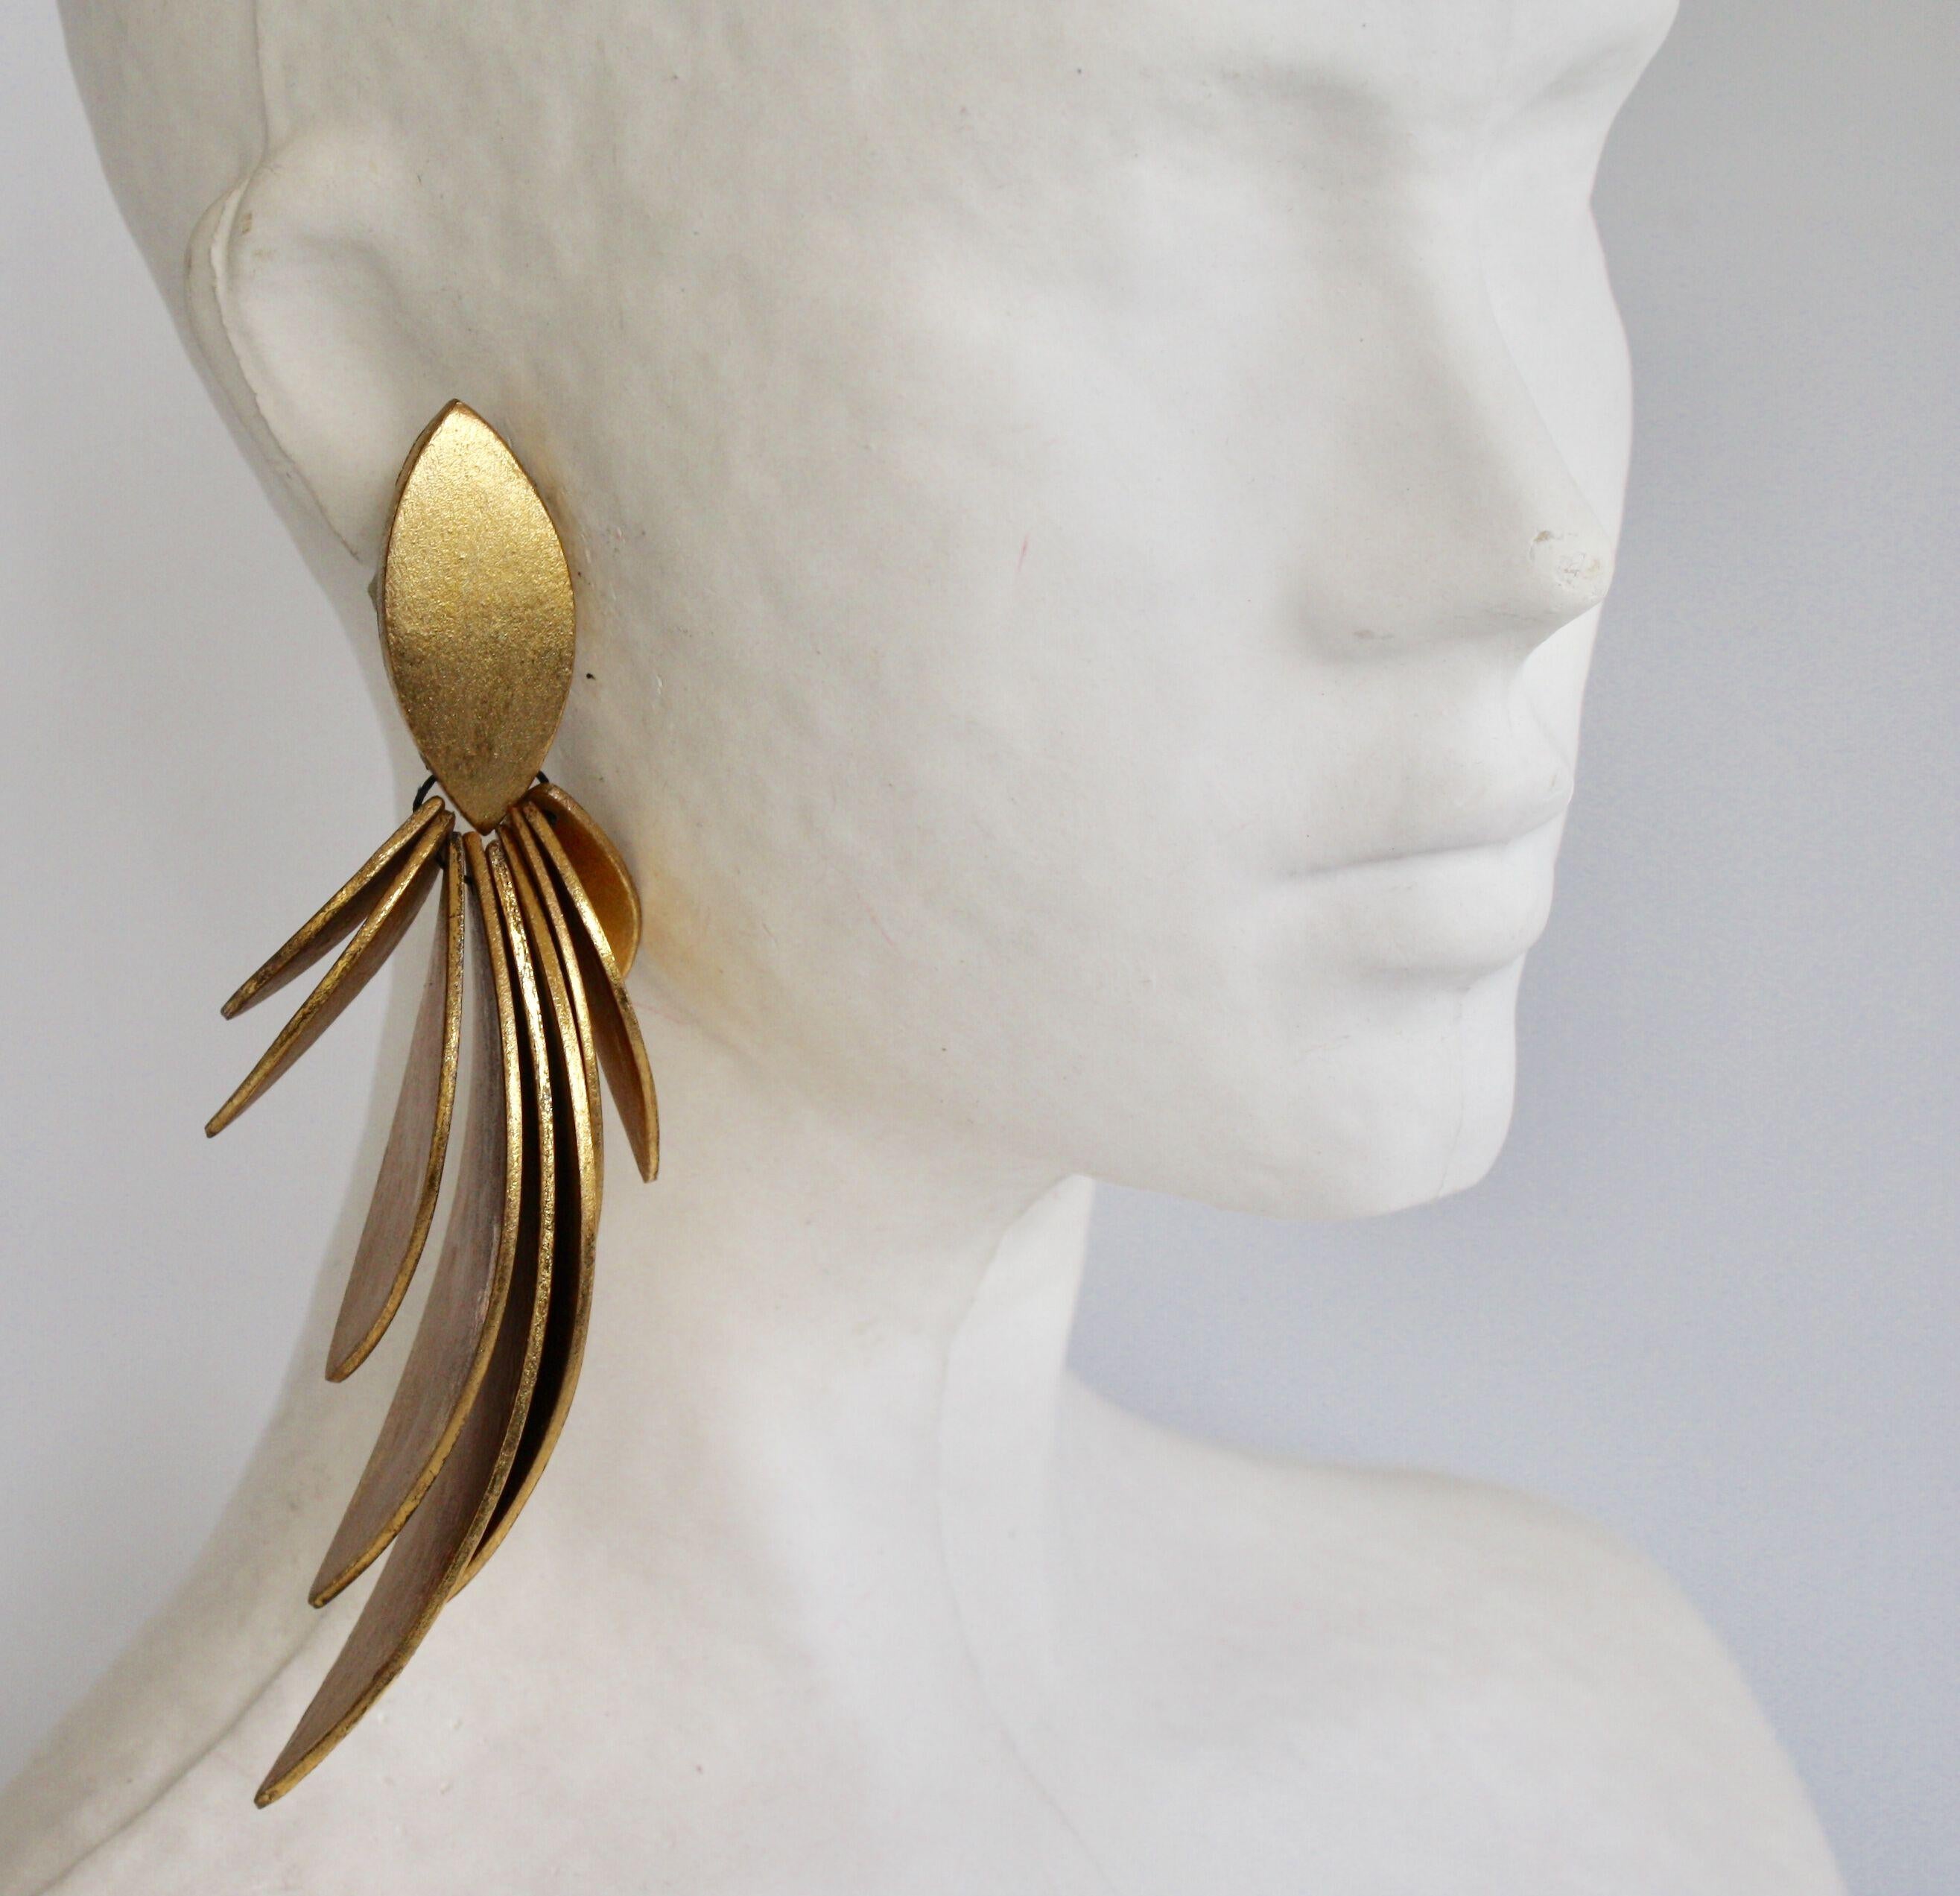 Feather inspired gold leaf and ebony wood clip earrings from Monies. Very lightweight despite the bold look. 